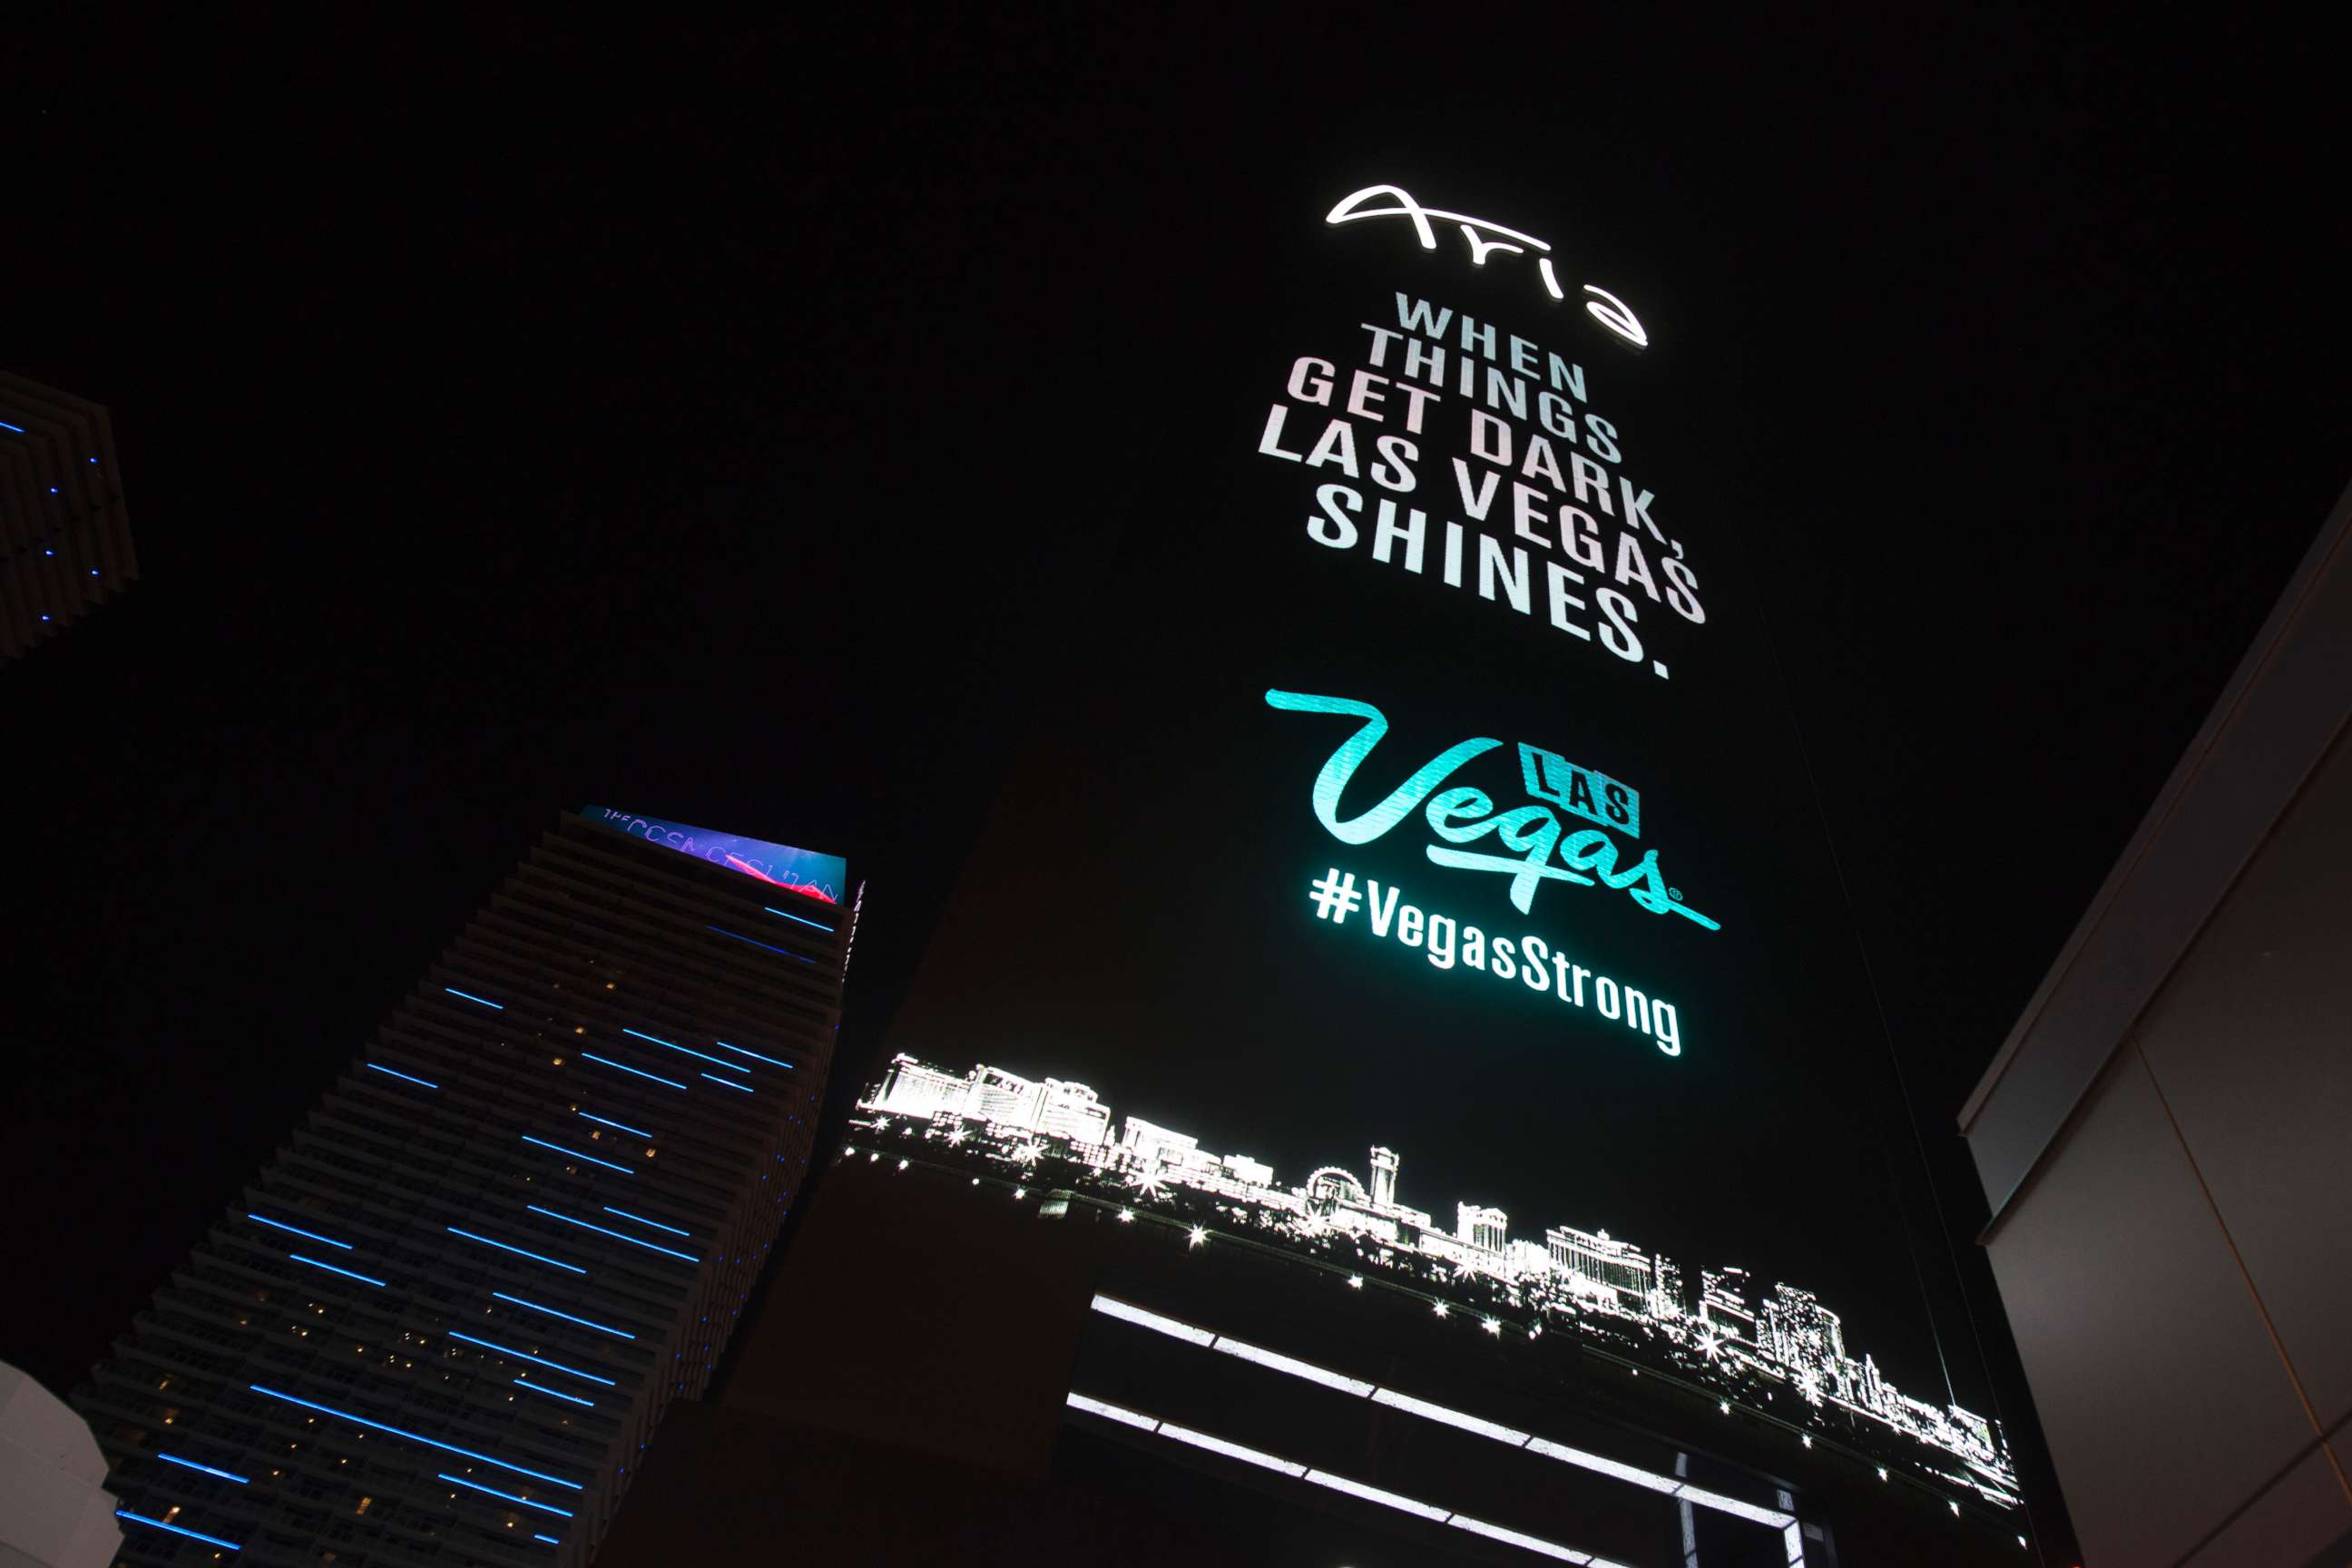 PHOTO: Las Vegas lights dimmed for 11 minutes on Oct. 8, 2017 to honor the victims of the mass shooting.